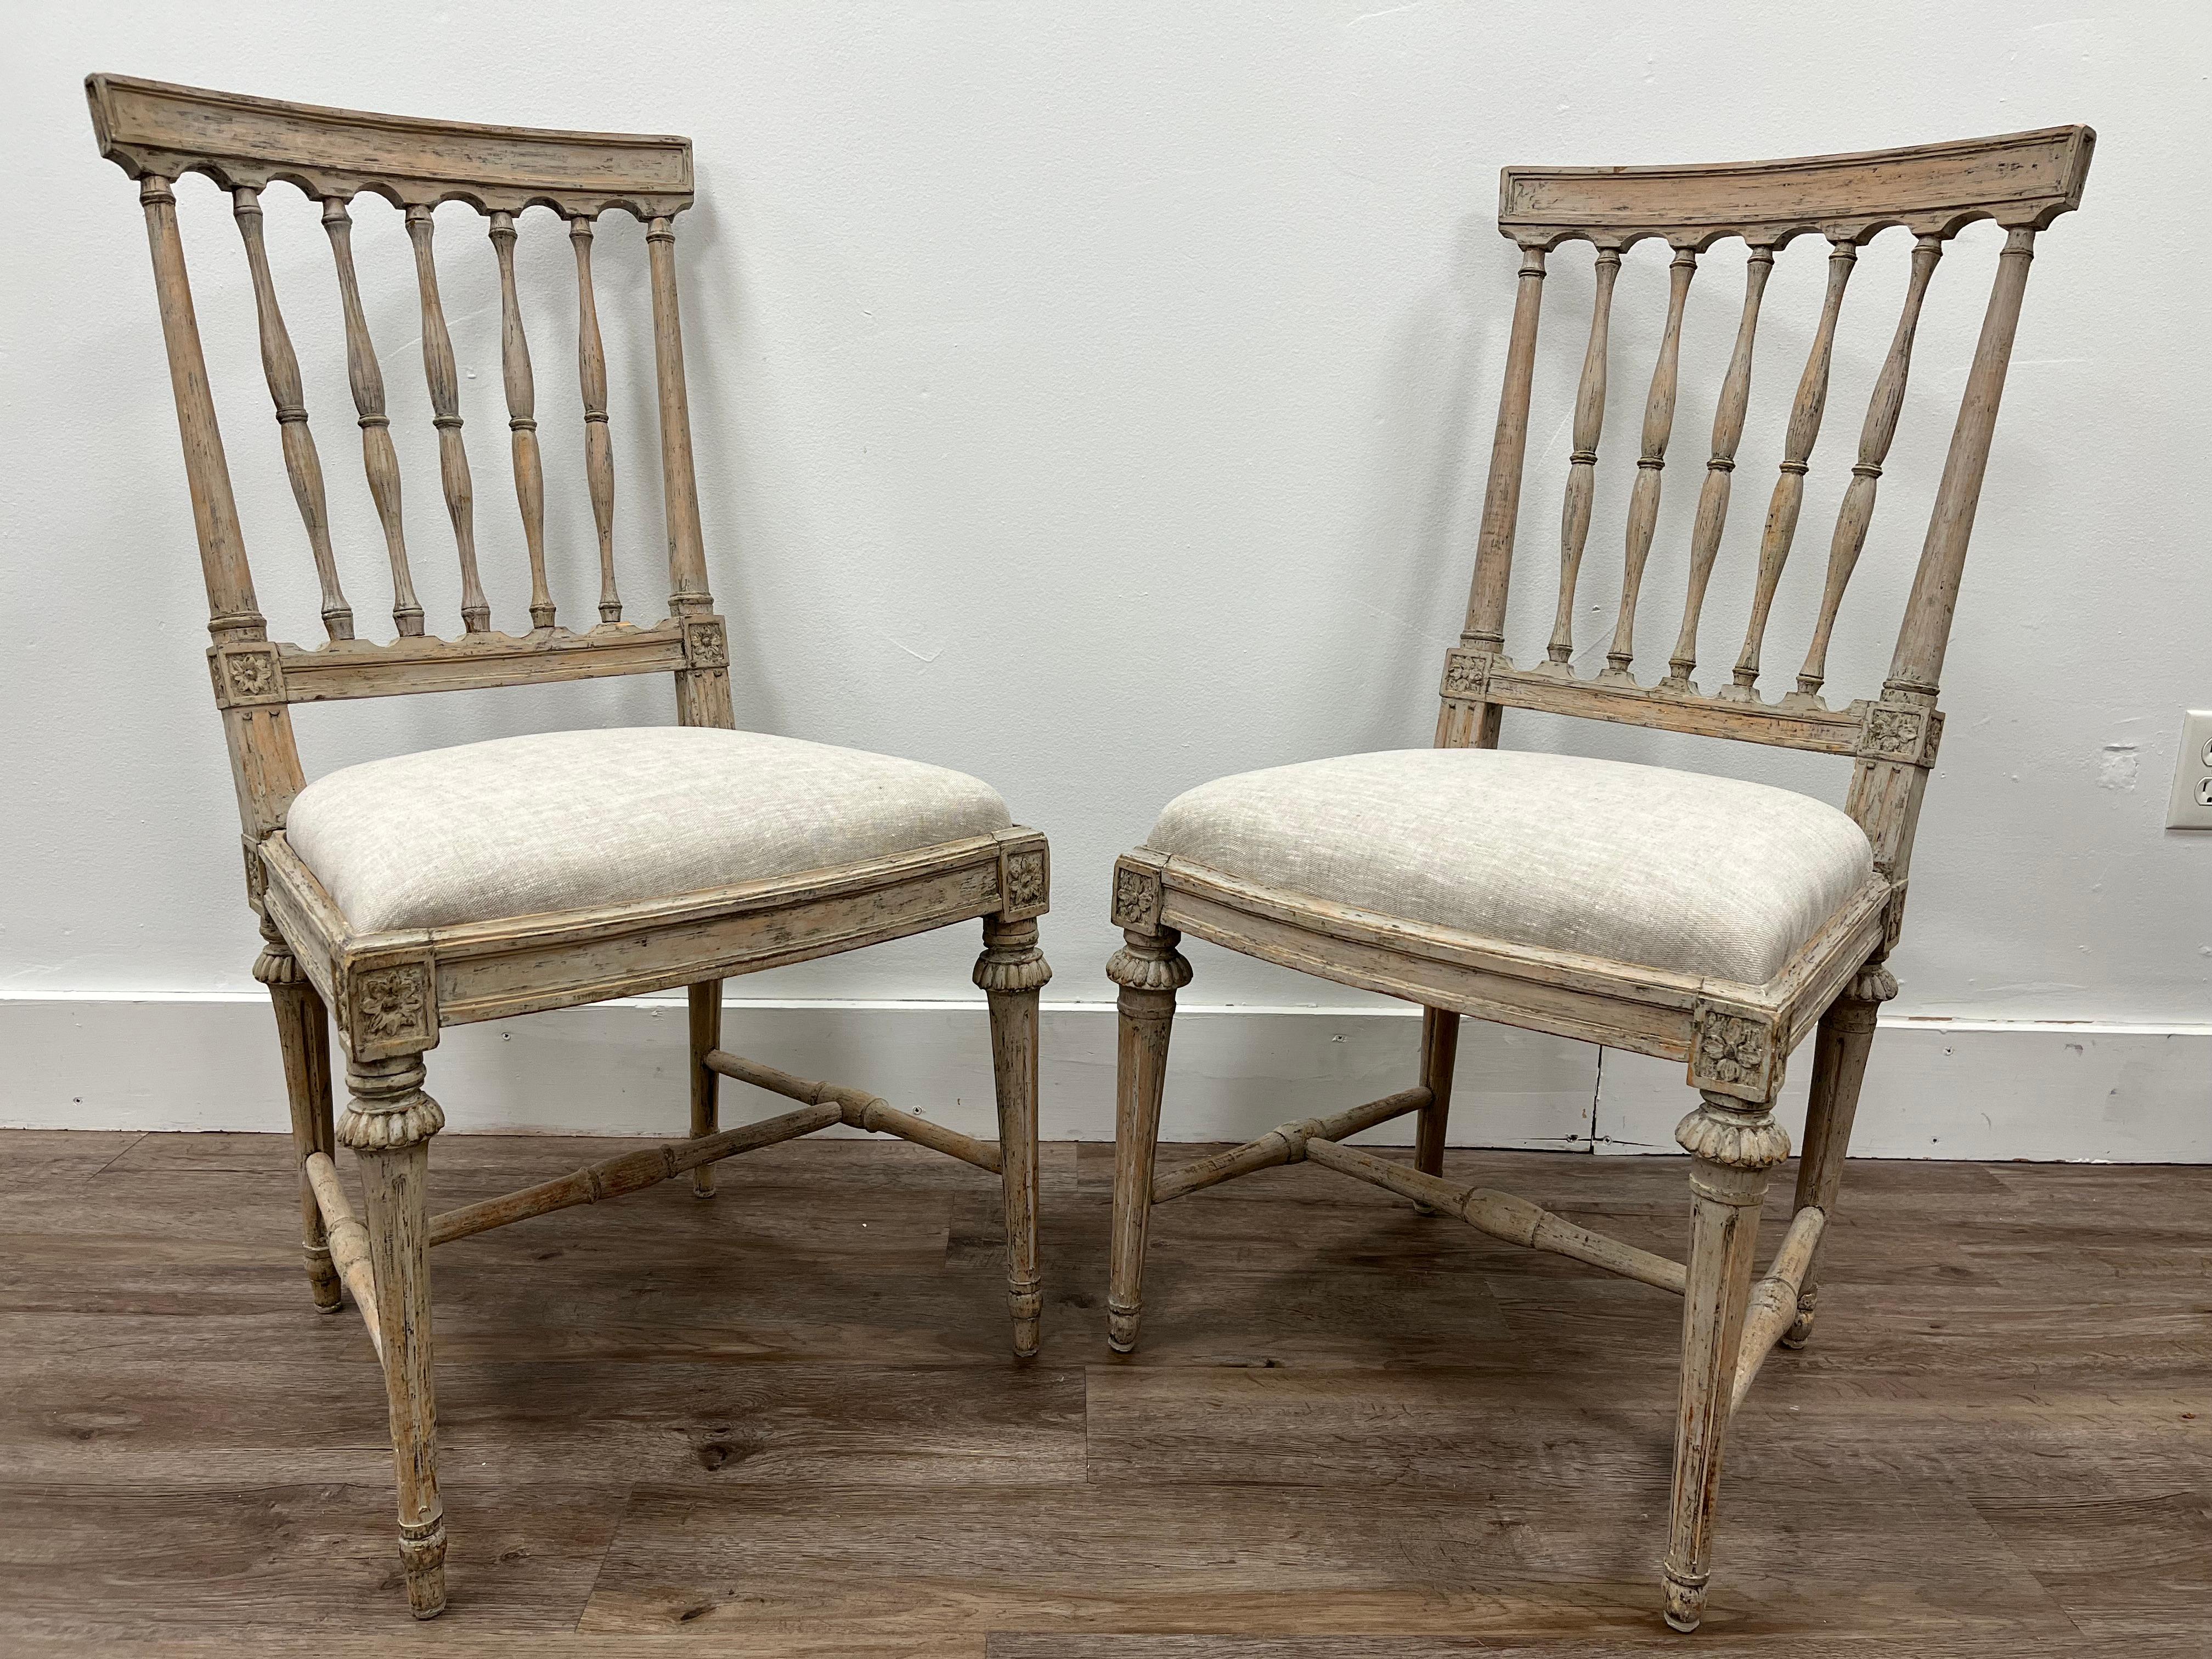 Paint Two Similar 18th Century Swedish Gustavian Chairs For Sale